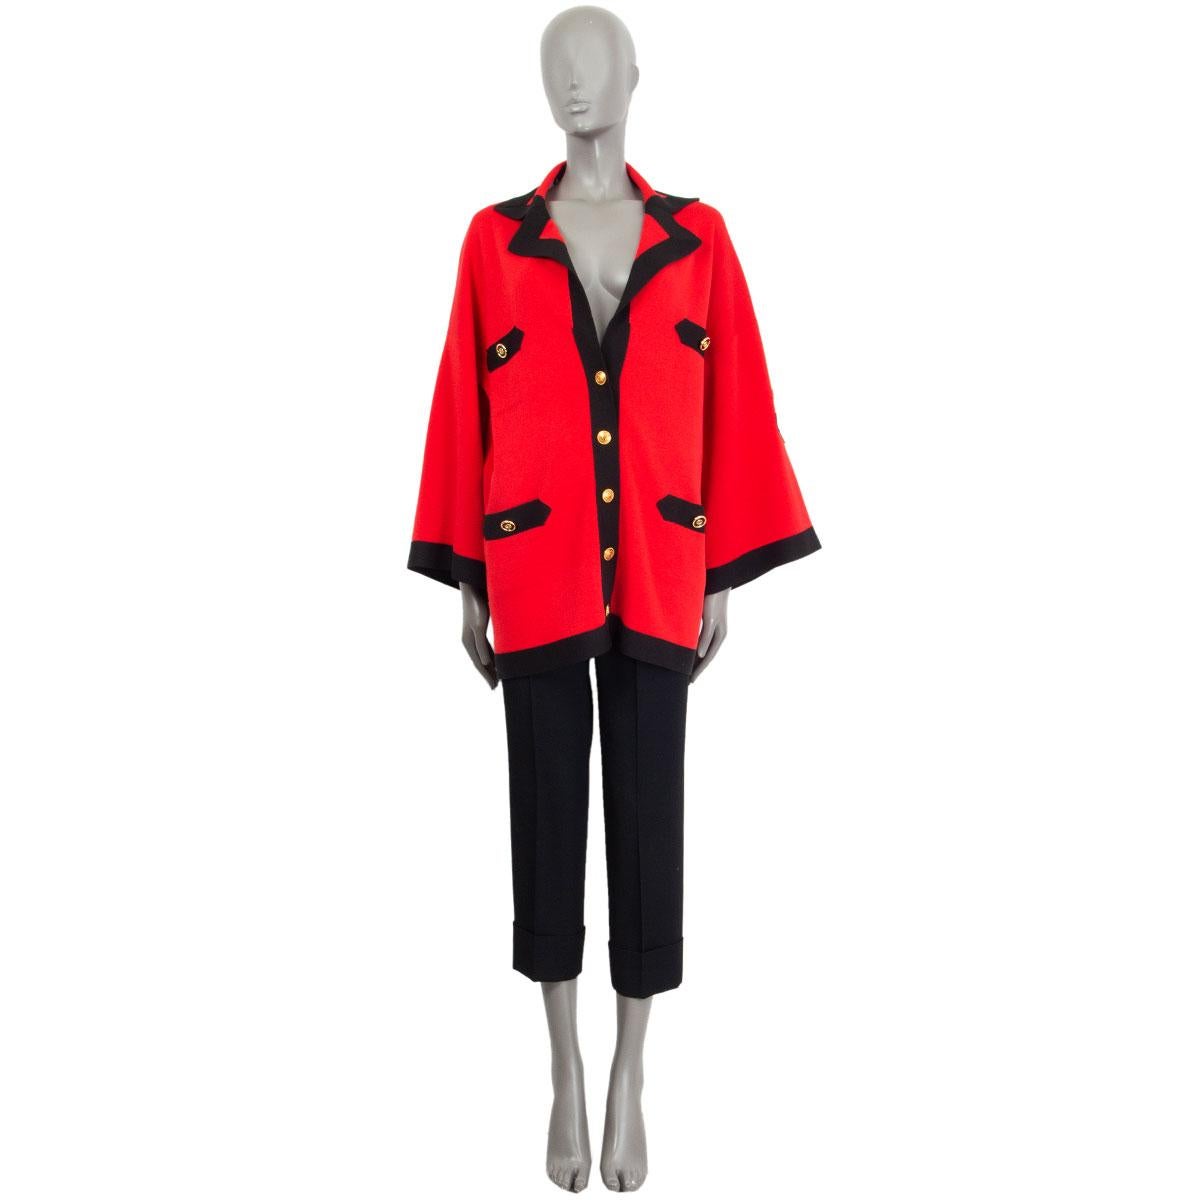 100% authentic Gucci anchor patch cardigan in red silk (61%) and cotton (39%) with black trim. Features an oversize fit, drop shoulders, four slash pockets that close with rounded gold and black buttons with GG-logo. Closes with a button fastening